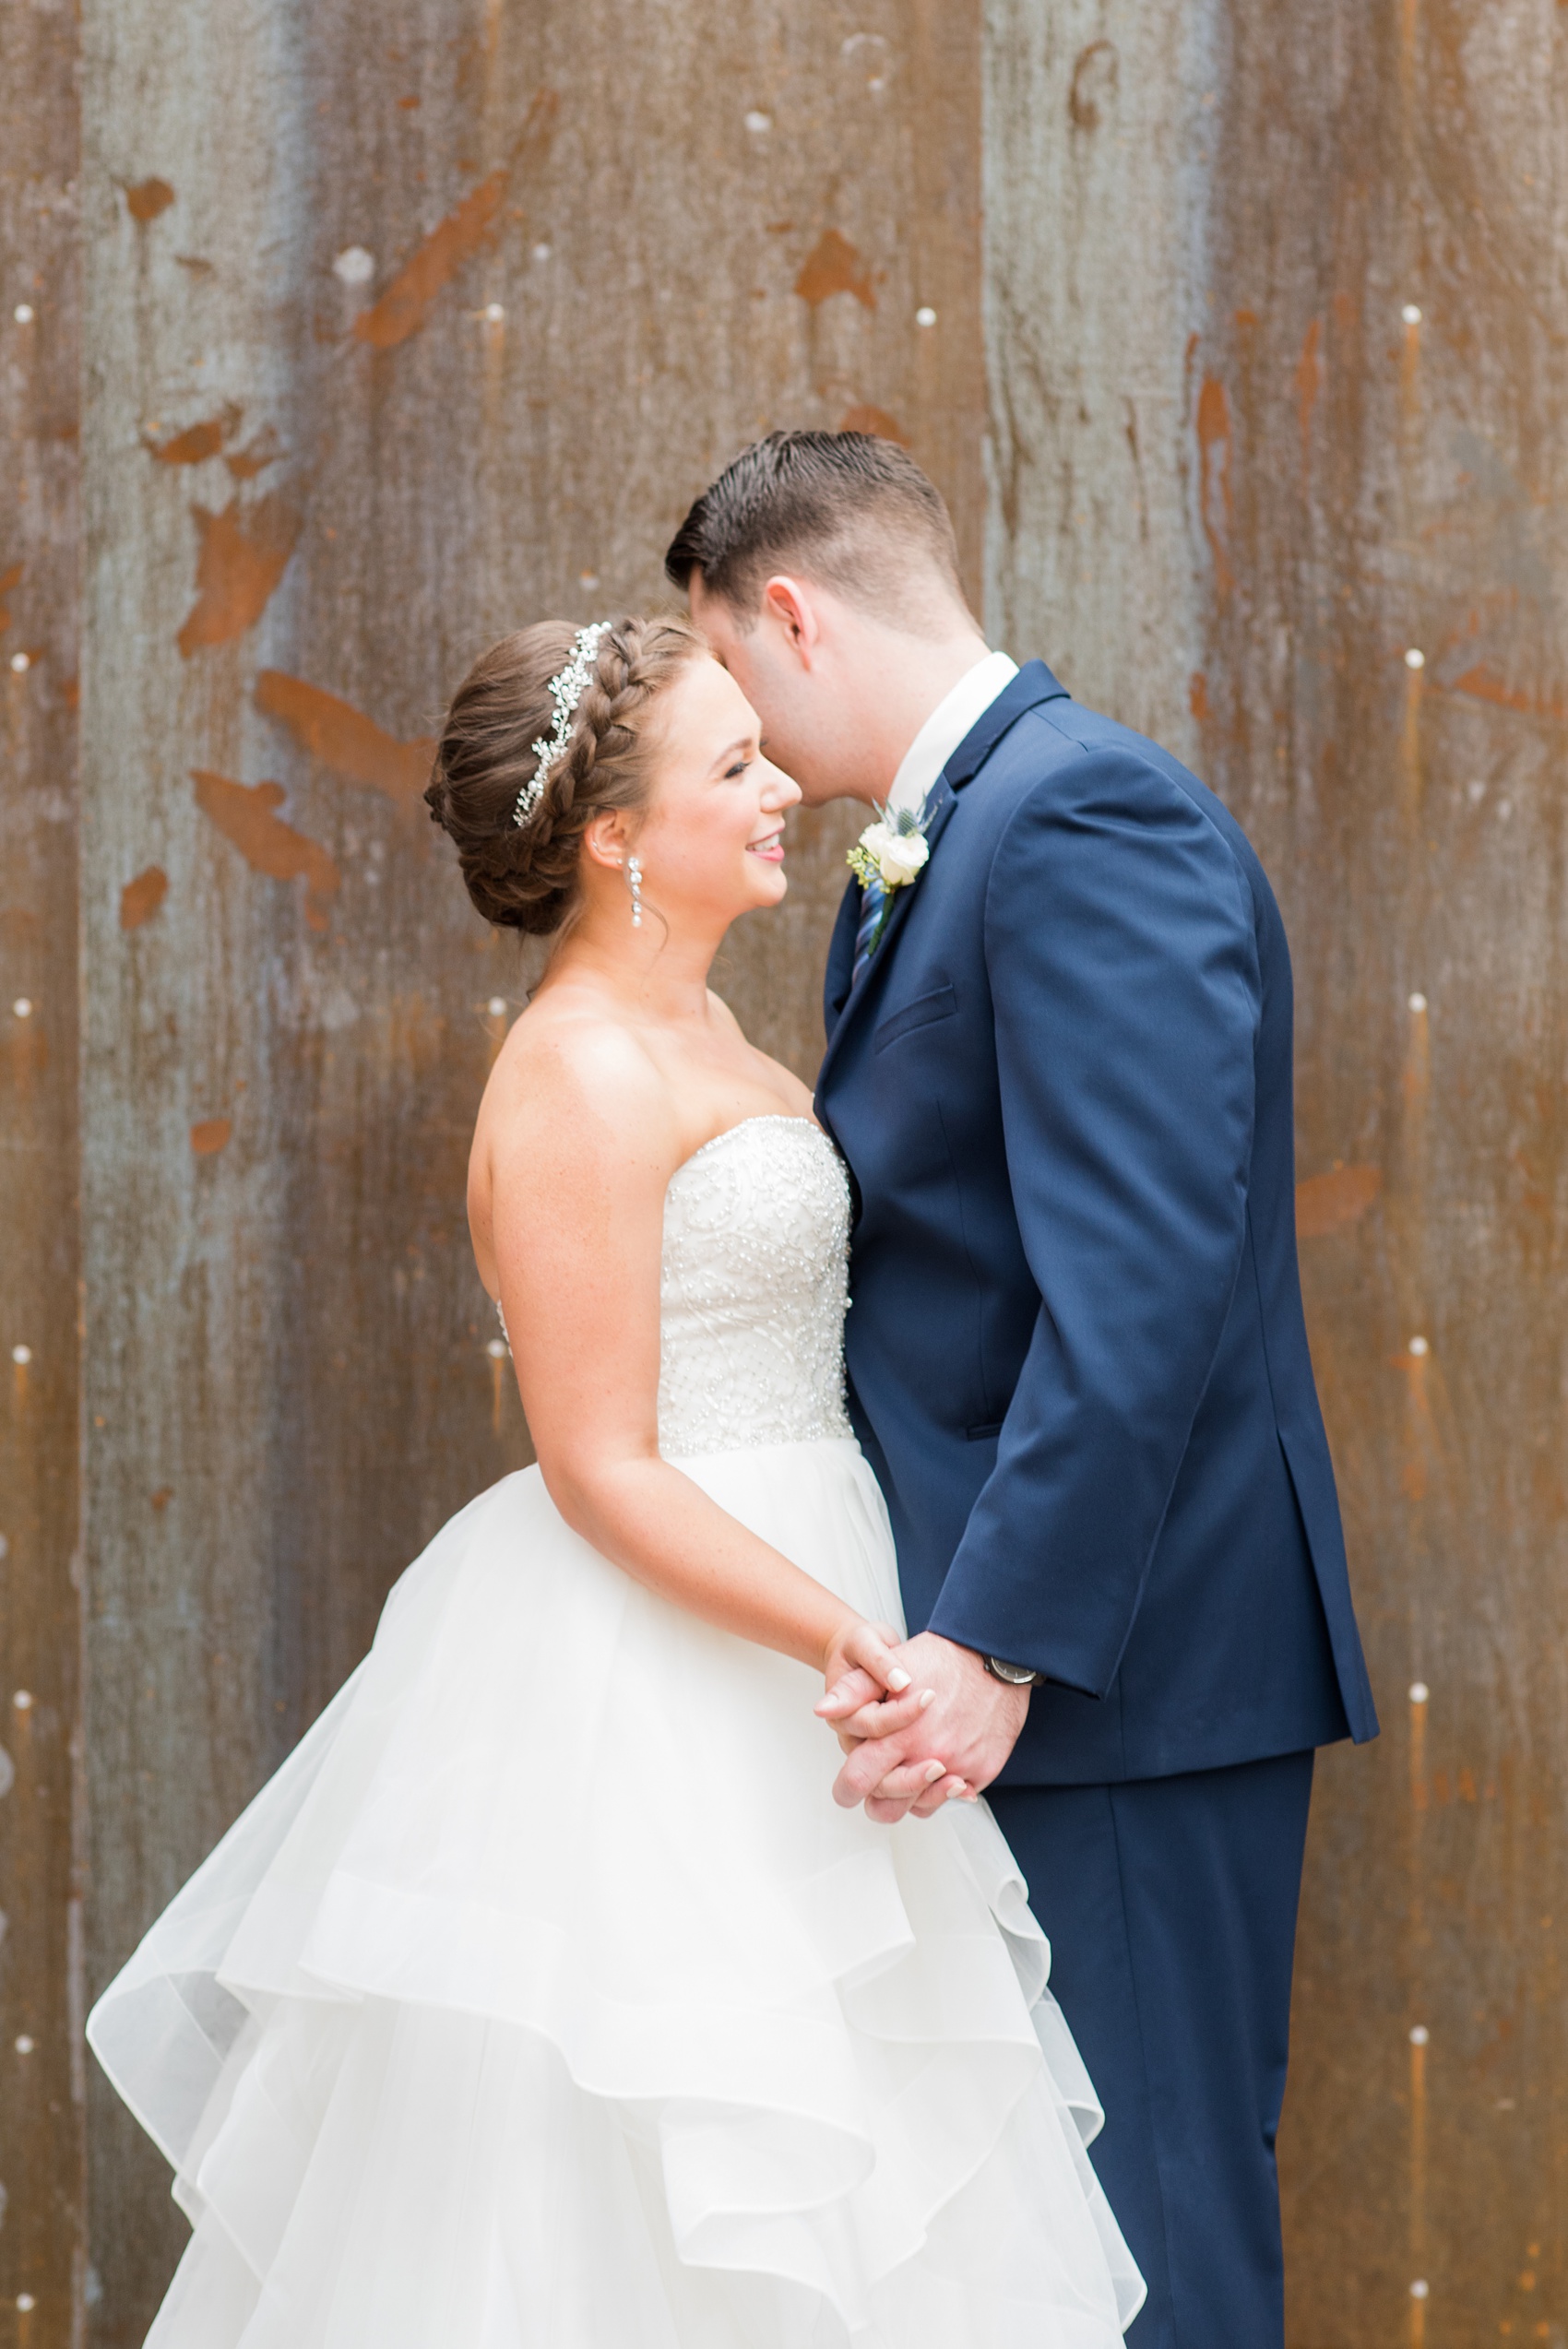 Durham wedding photos at The Cookery by Mikkel Paige Photography in North Carolina. The bride wore a strapless beaded gown with many layers in the skirt and groom wore a navy blue suit at their rustic winter day.